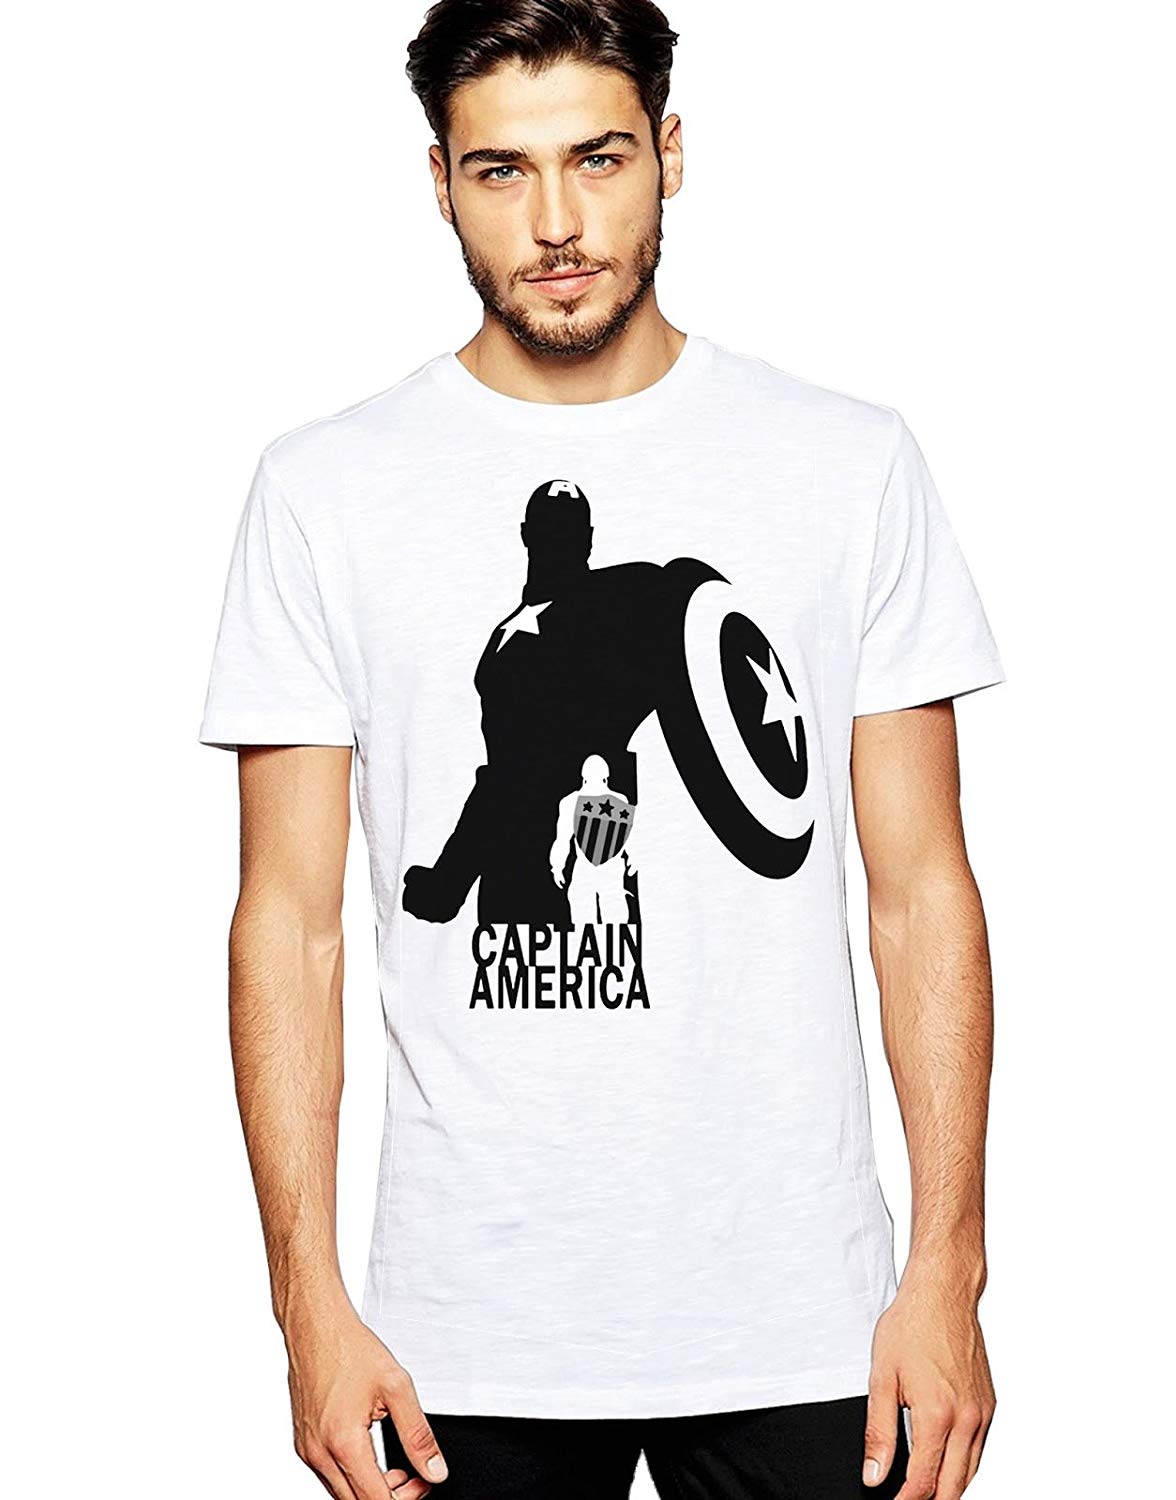 DOUBLE F ROUND NECK HALF SLEEVE WHITE COLOR CAPTAIN AMERICA LATEST PRINTED T-SHIRT FOR MEN